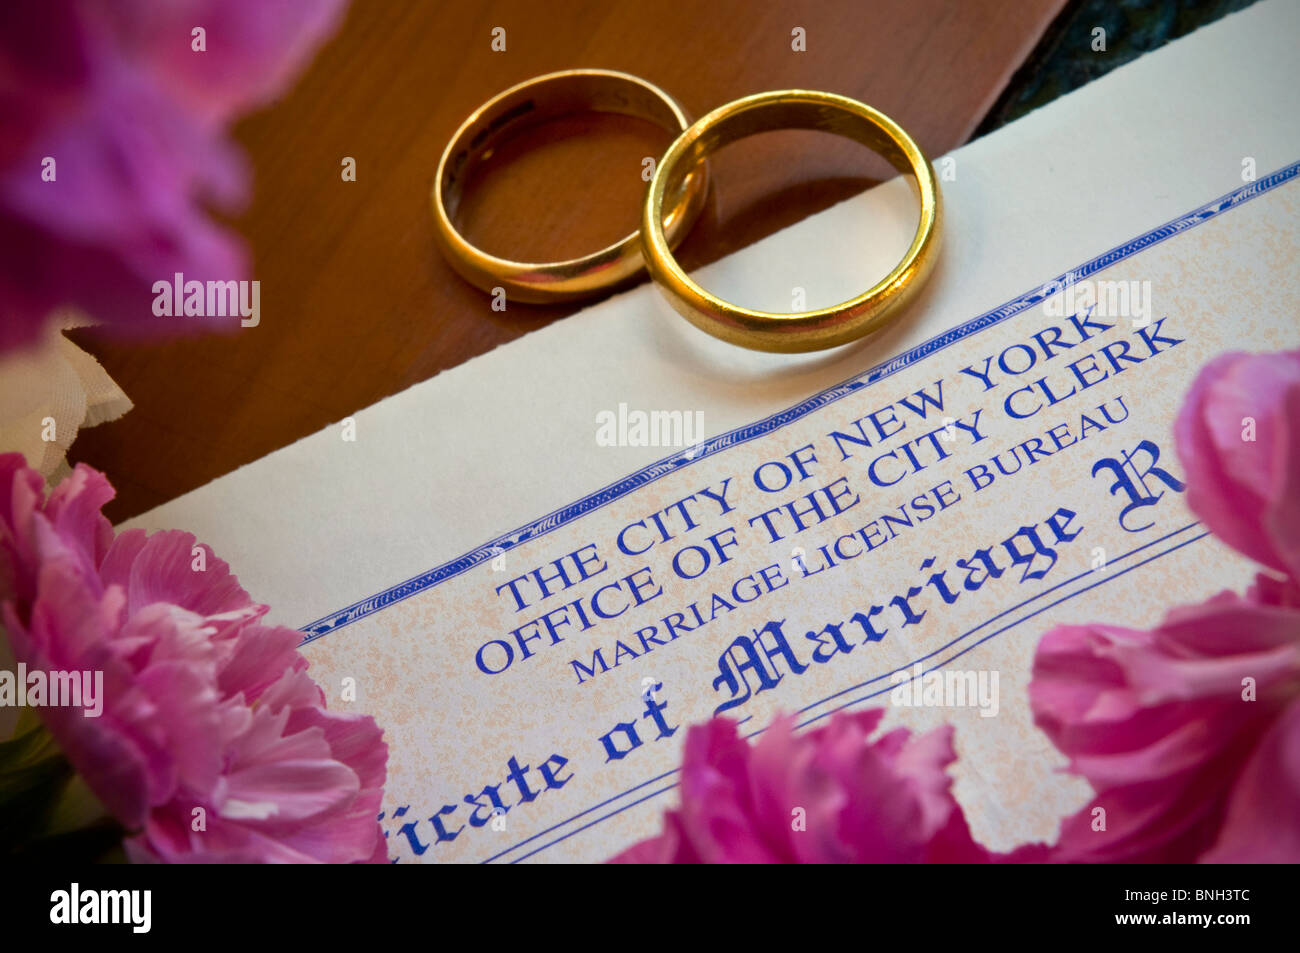 Marriage certificate on desk with two gold wedding rings City Hall Manhattan New York USA Stock Photo